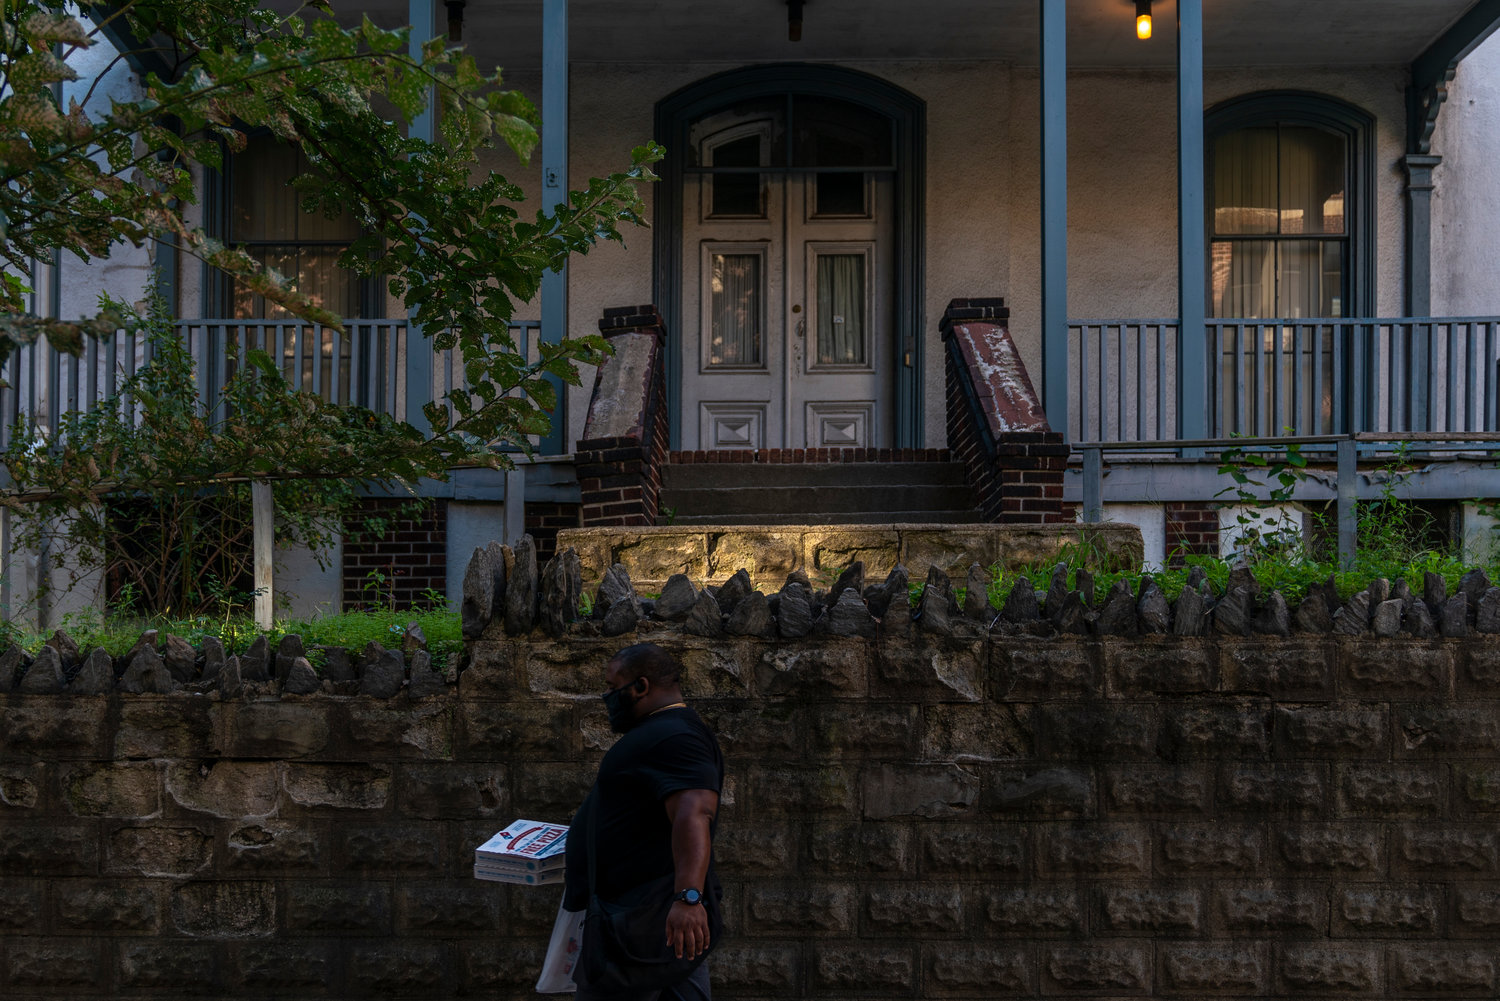 A person walks past 3029 Godwin Terrace with a pair of pizzas in hand, creating a much different streetscape than what the Moller family saw when they first moved in back in 1870.